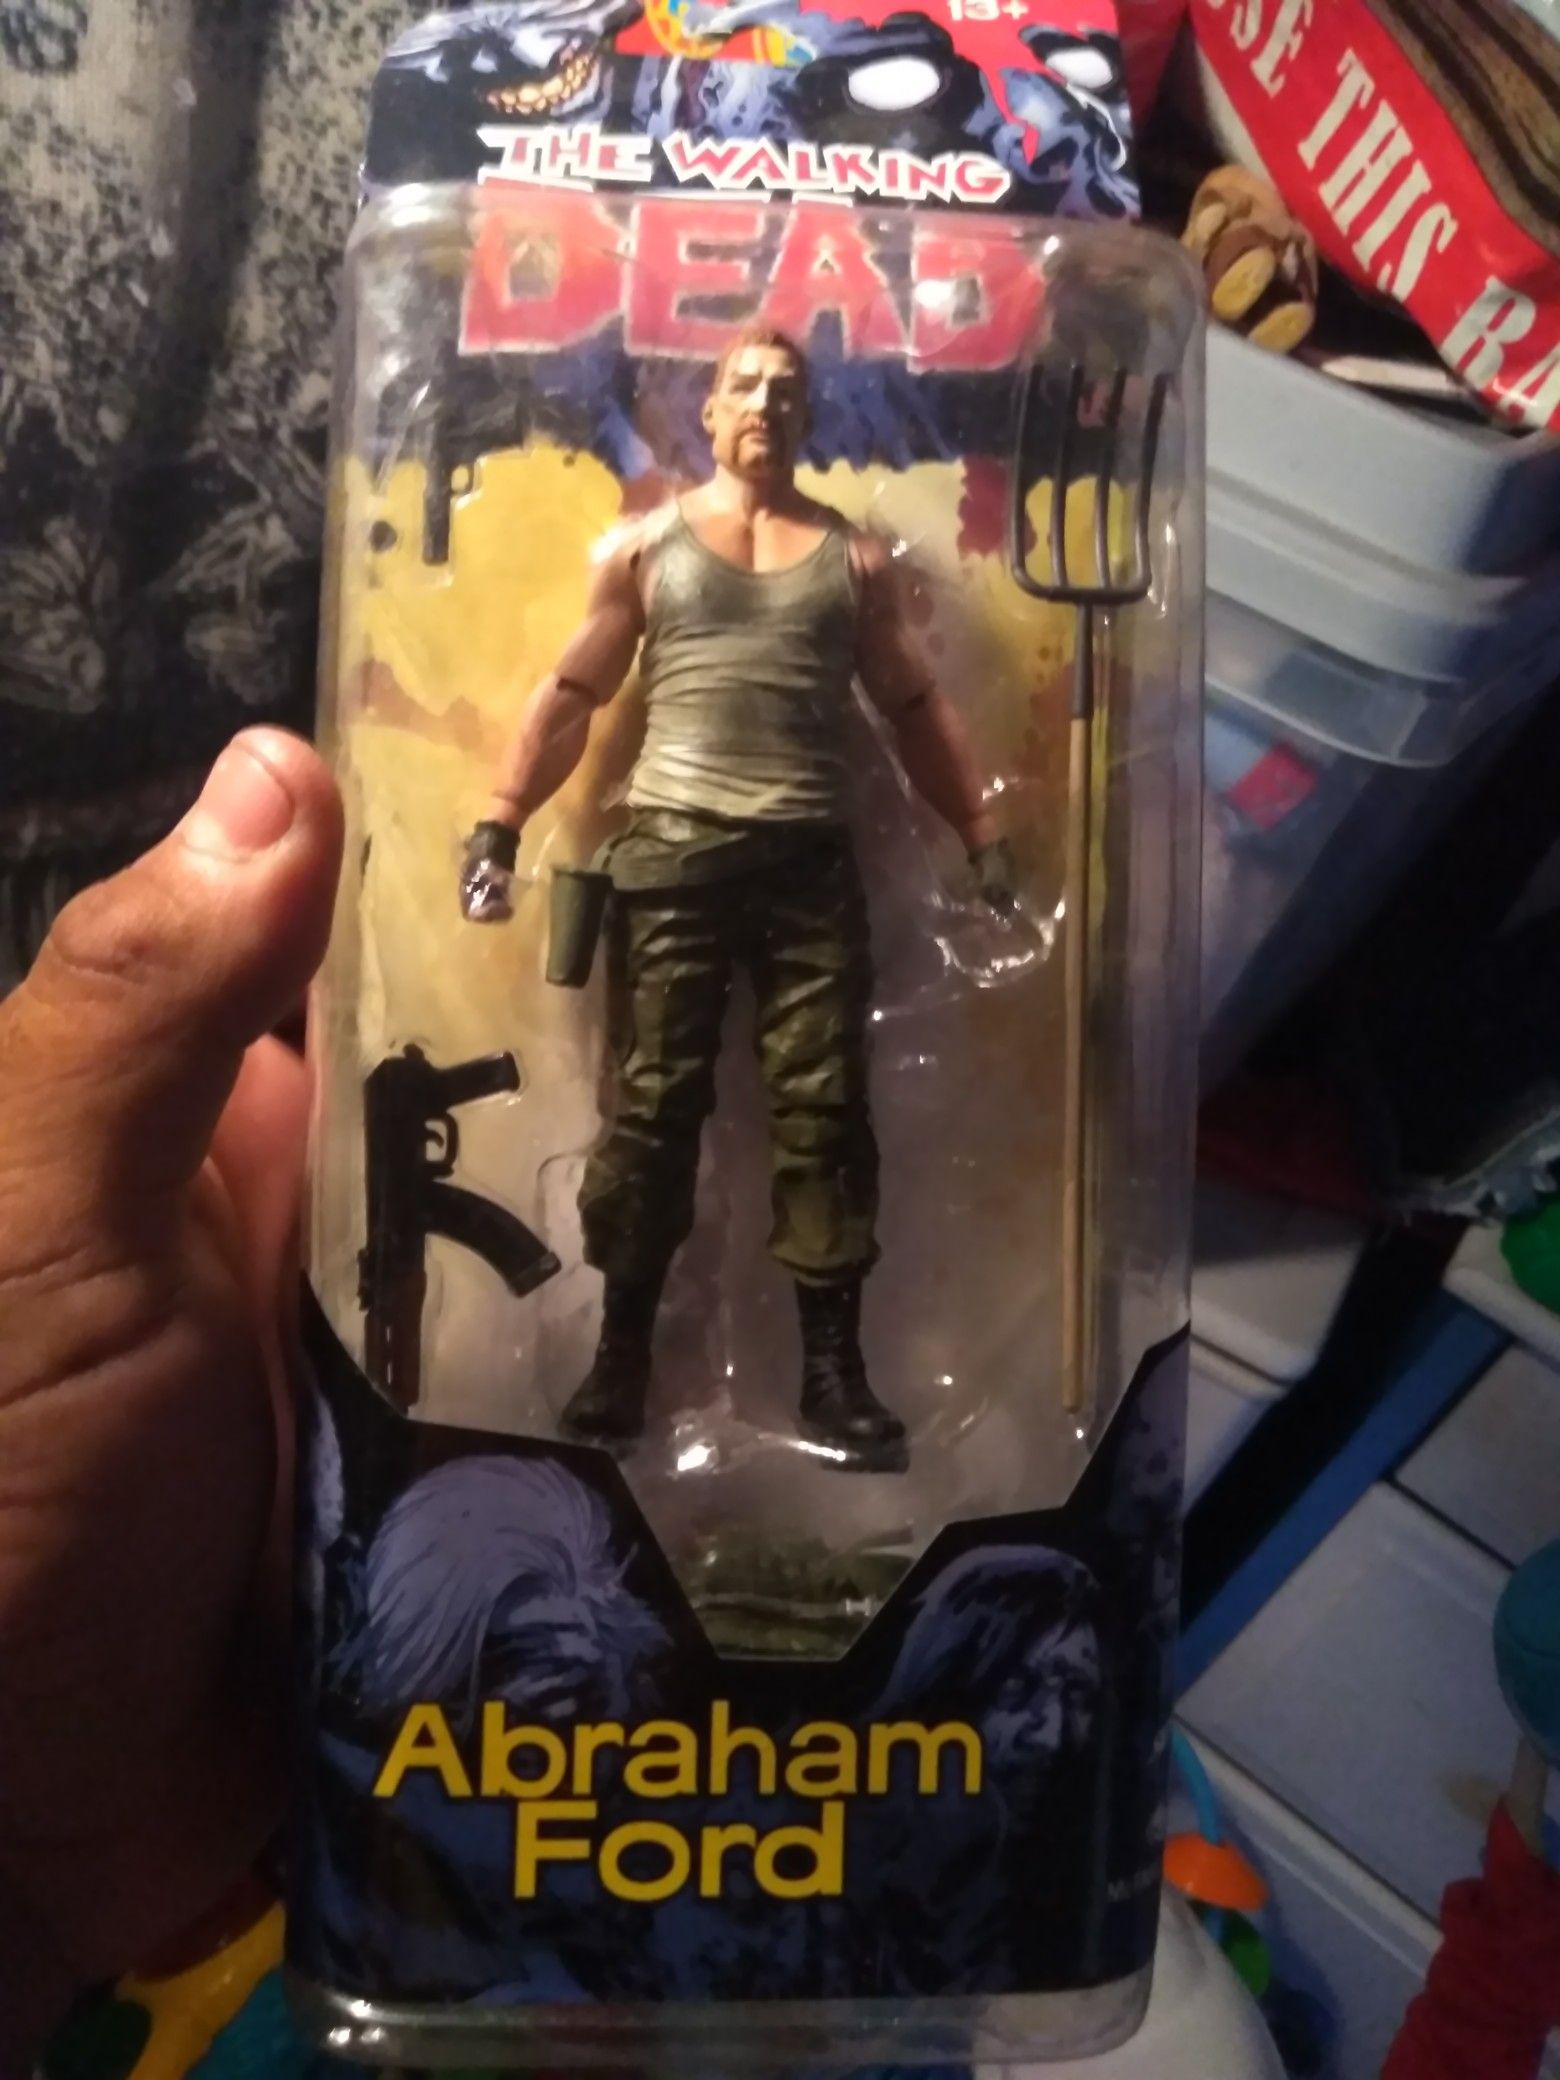 This is post number #2 of the walking dead action figures